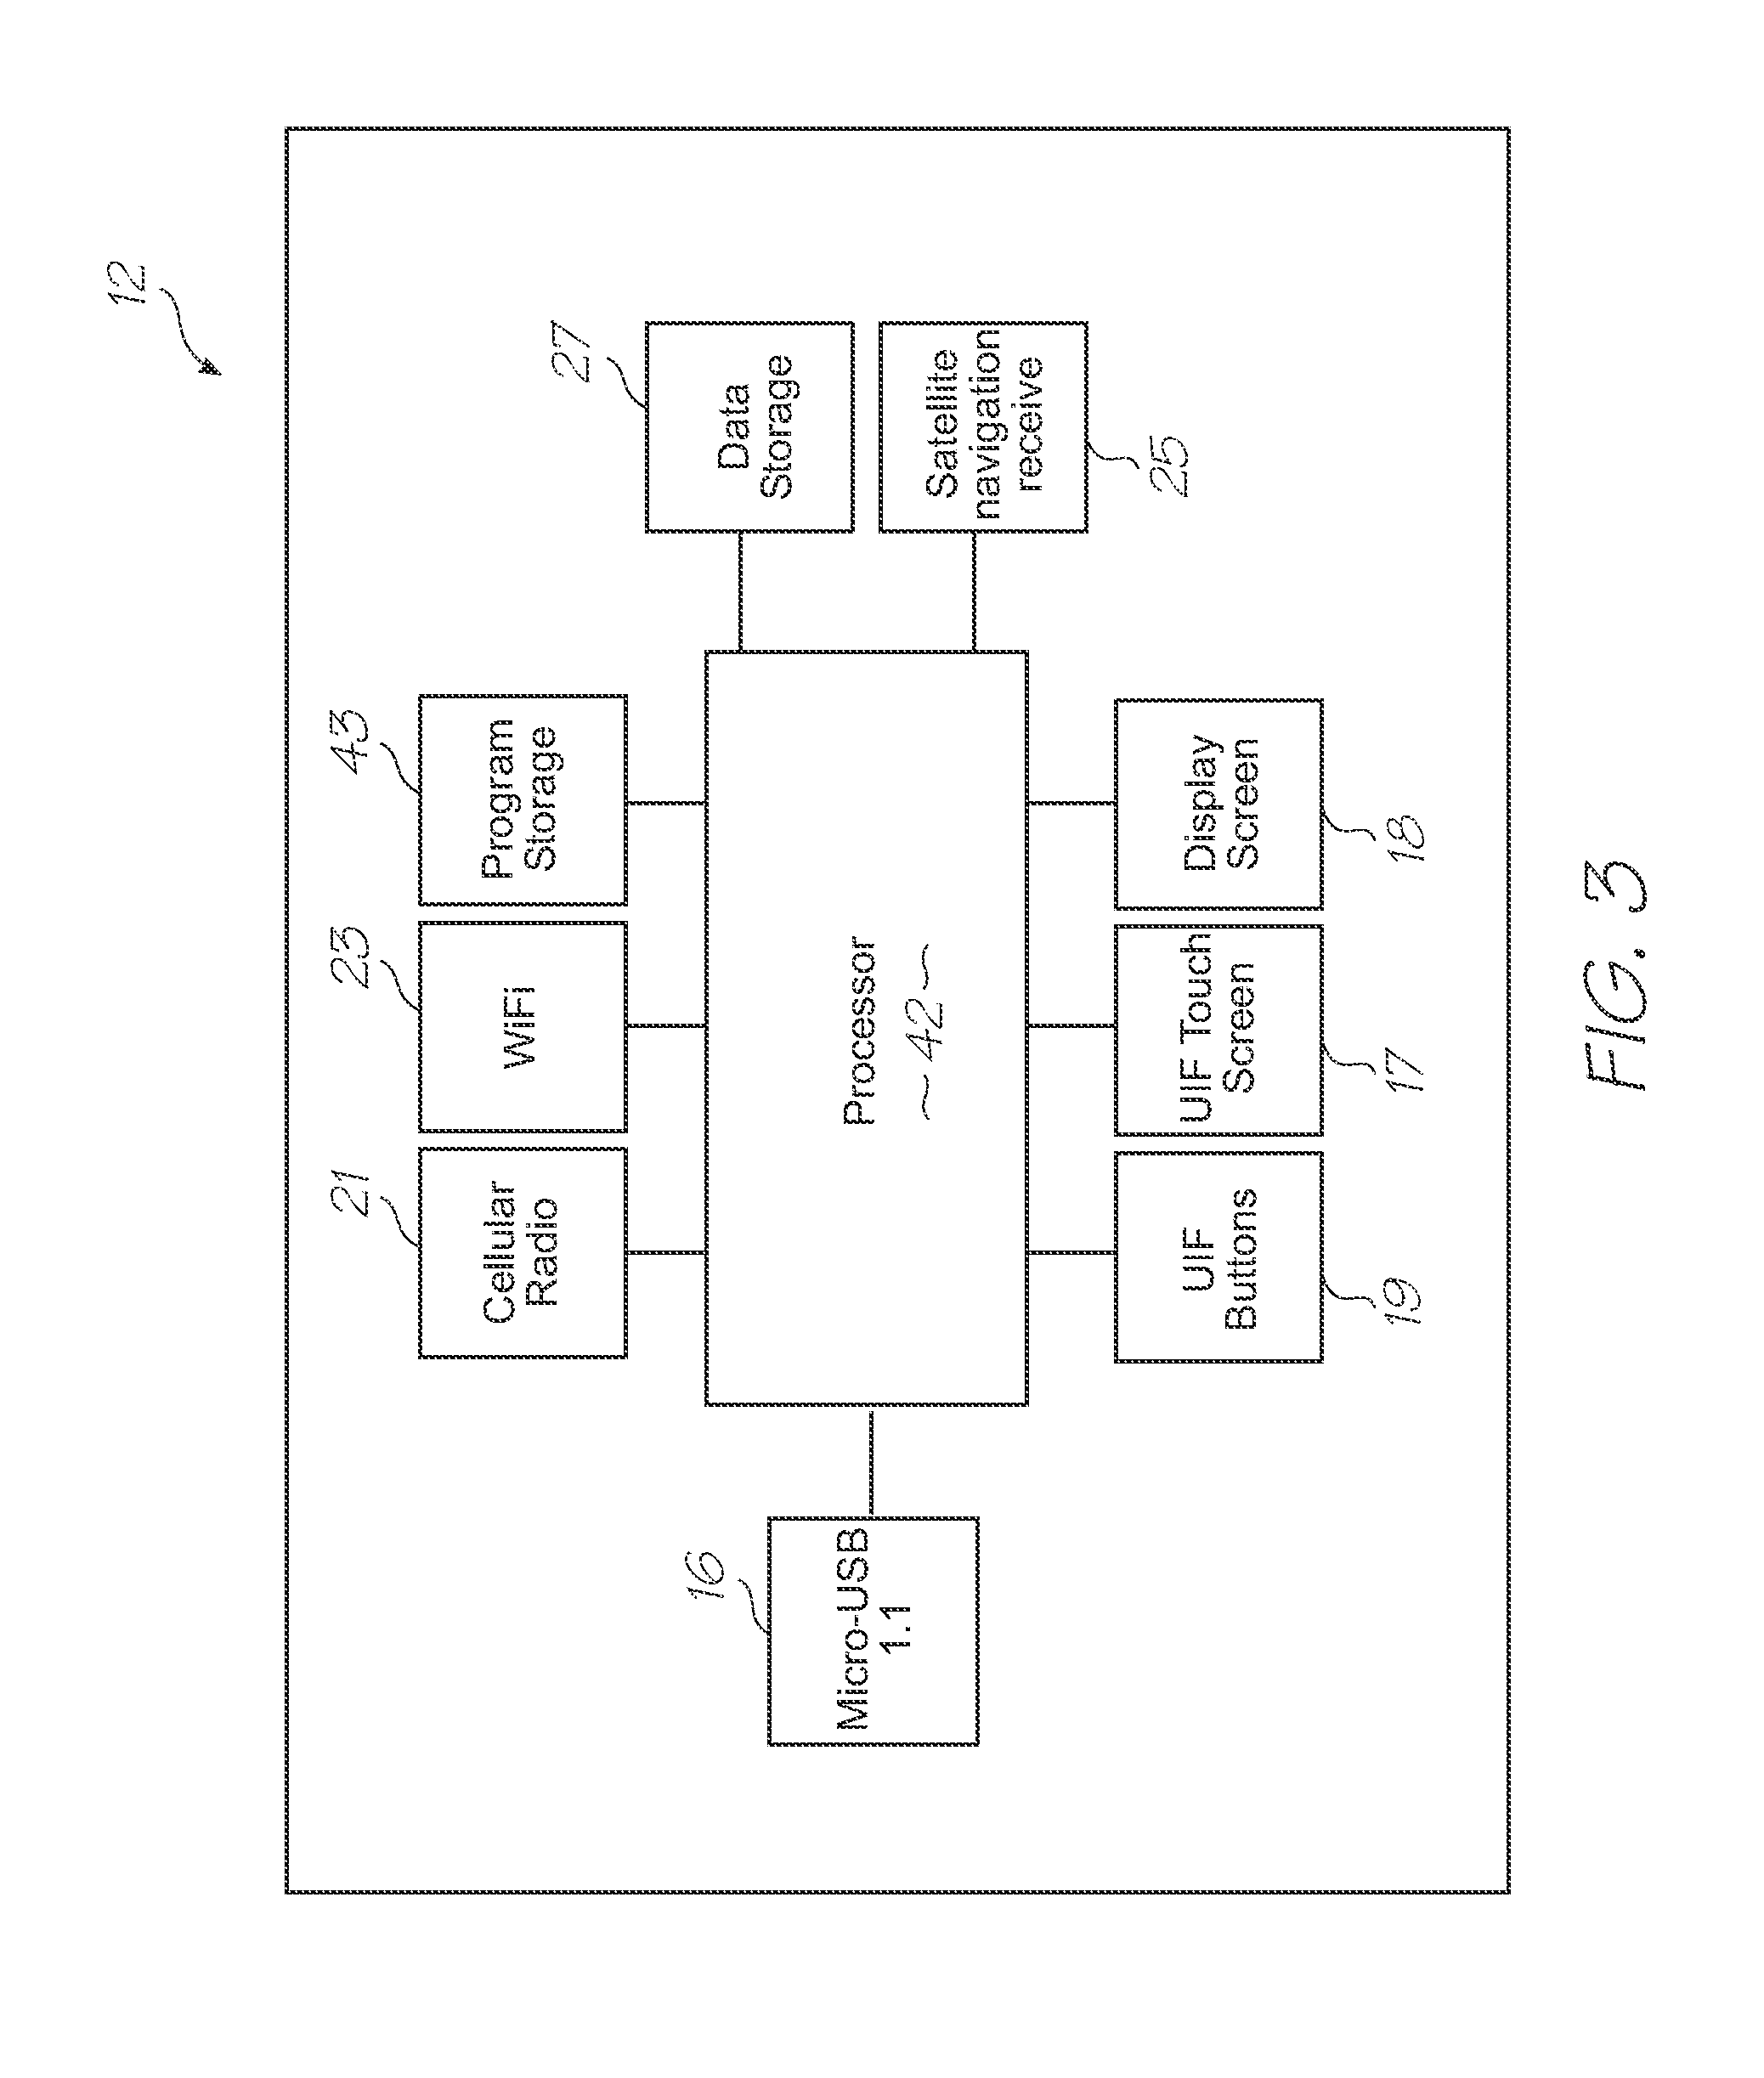 Test module with microfluidic device having loc and dialysis device for separating pathogens from other constituents in a biological sample